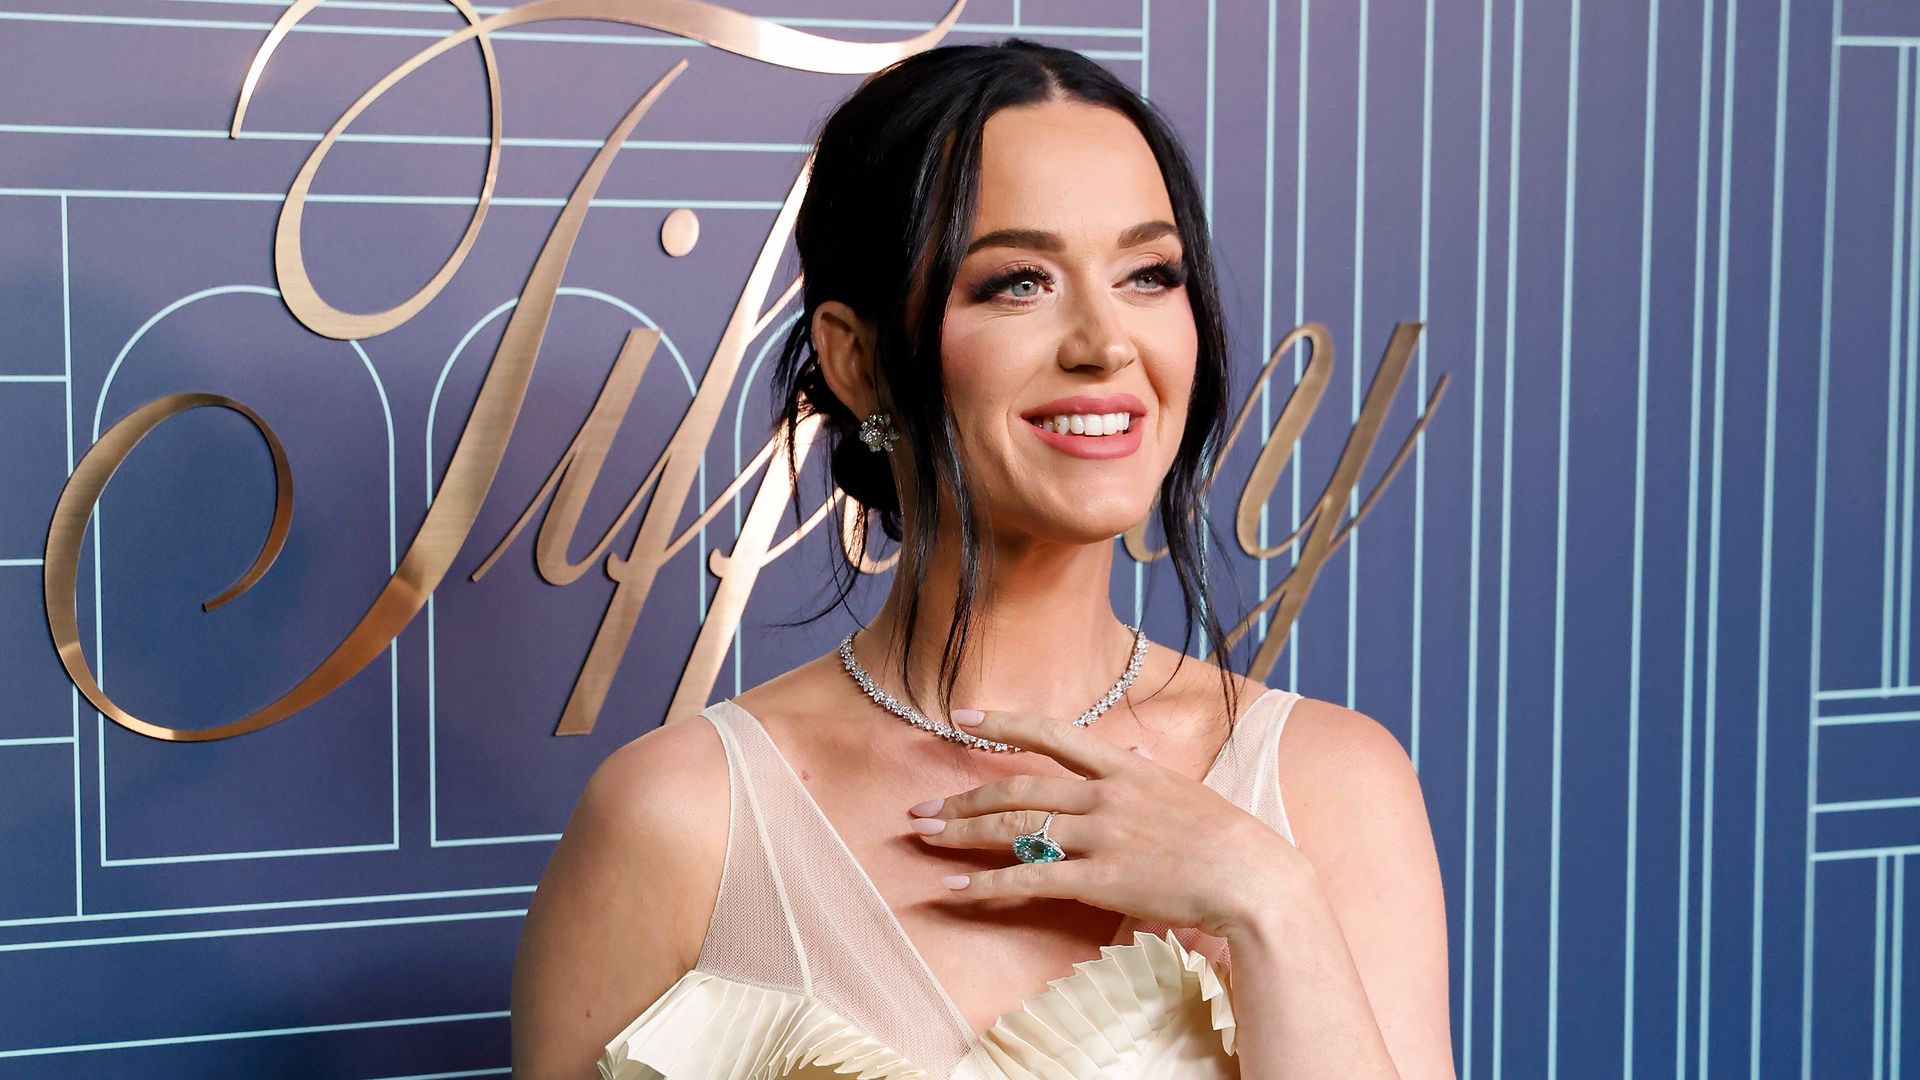 Katy Perry defended by former American Idol hopeful over bullying accusations